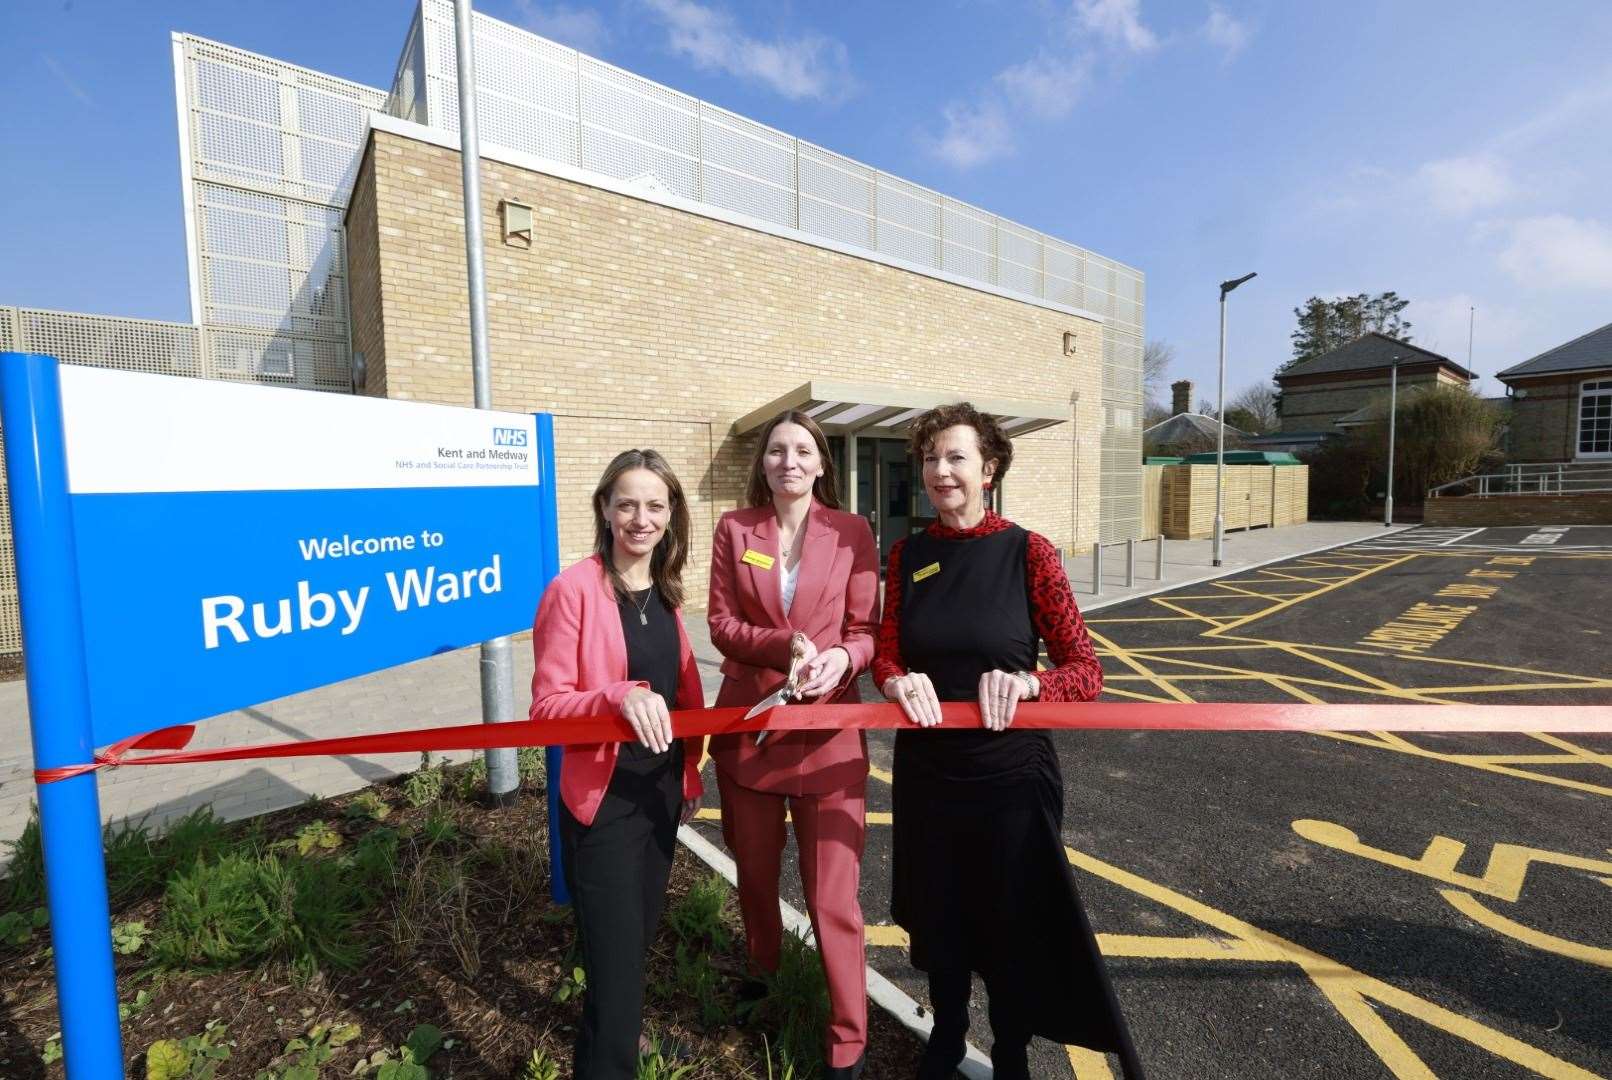 From left: MP for Faversham and Mid Kent, Helen Whately, KMPT Chief Executive Sheila Stenson and Trust Chair, Dr Jackie Craissati at the opening of the new standalone hospital Ruby Ward